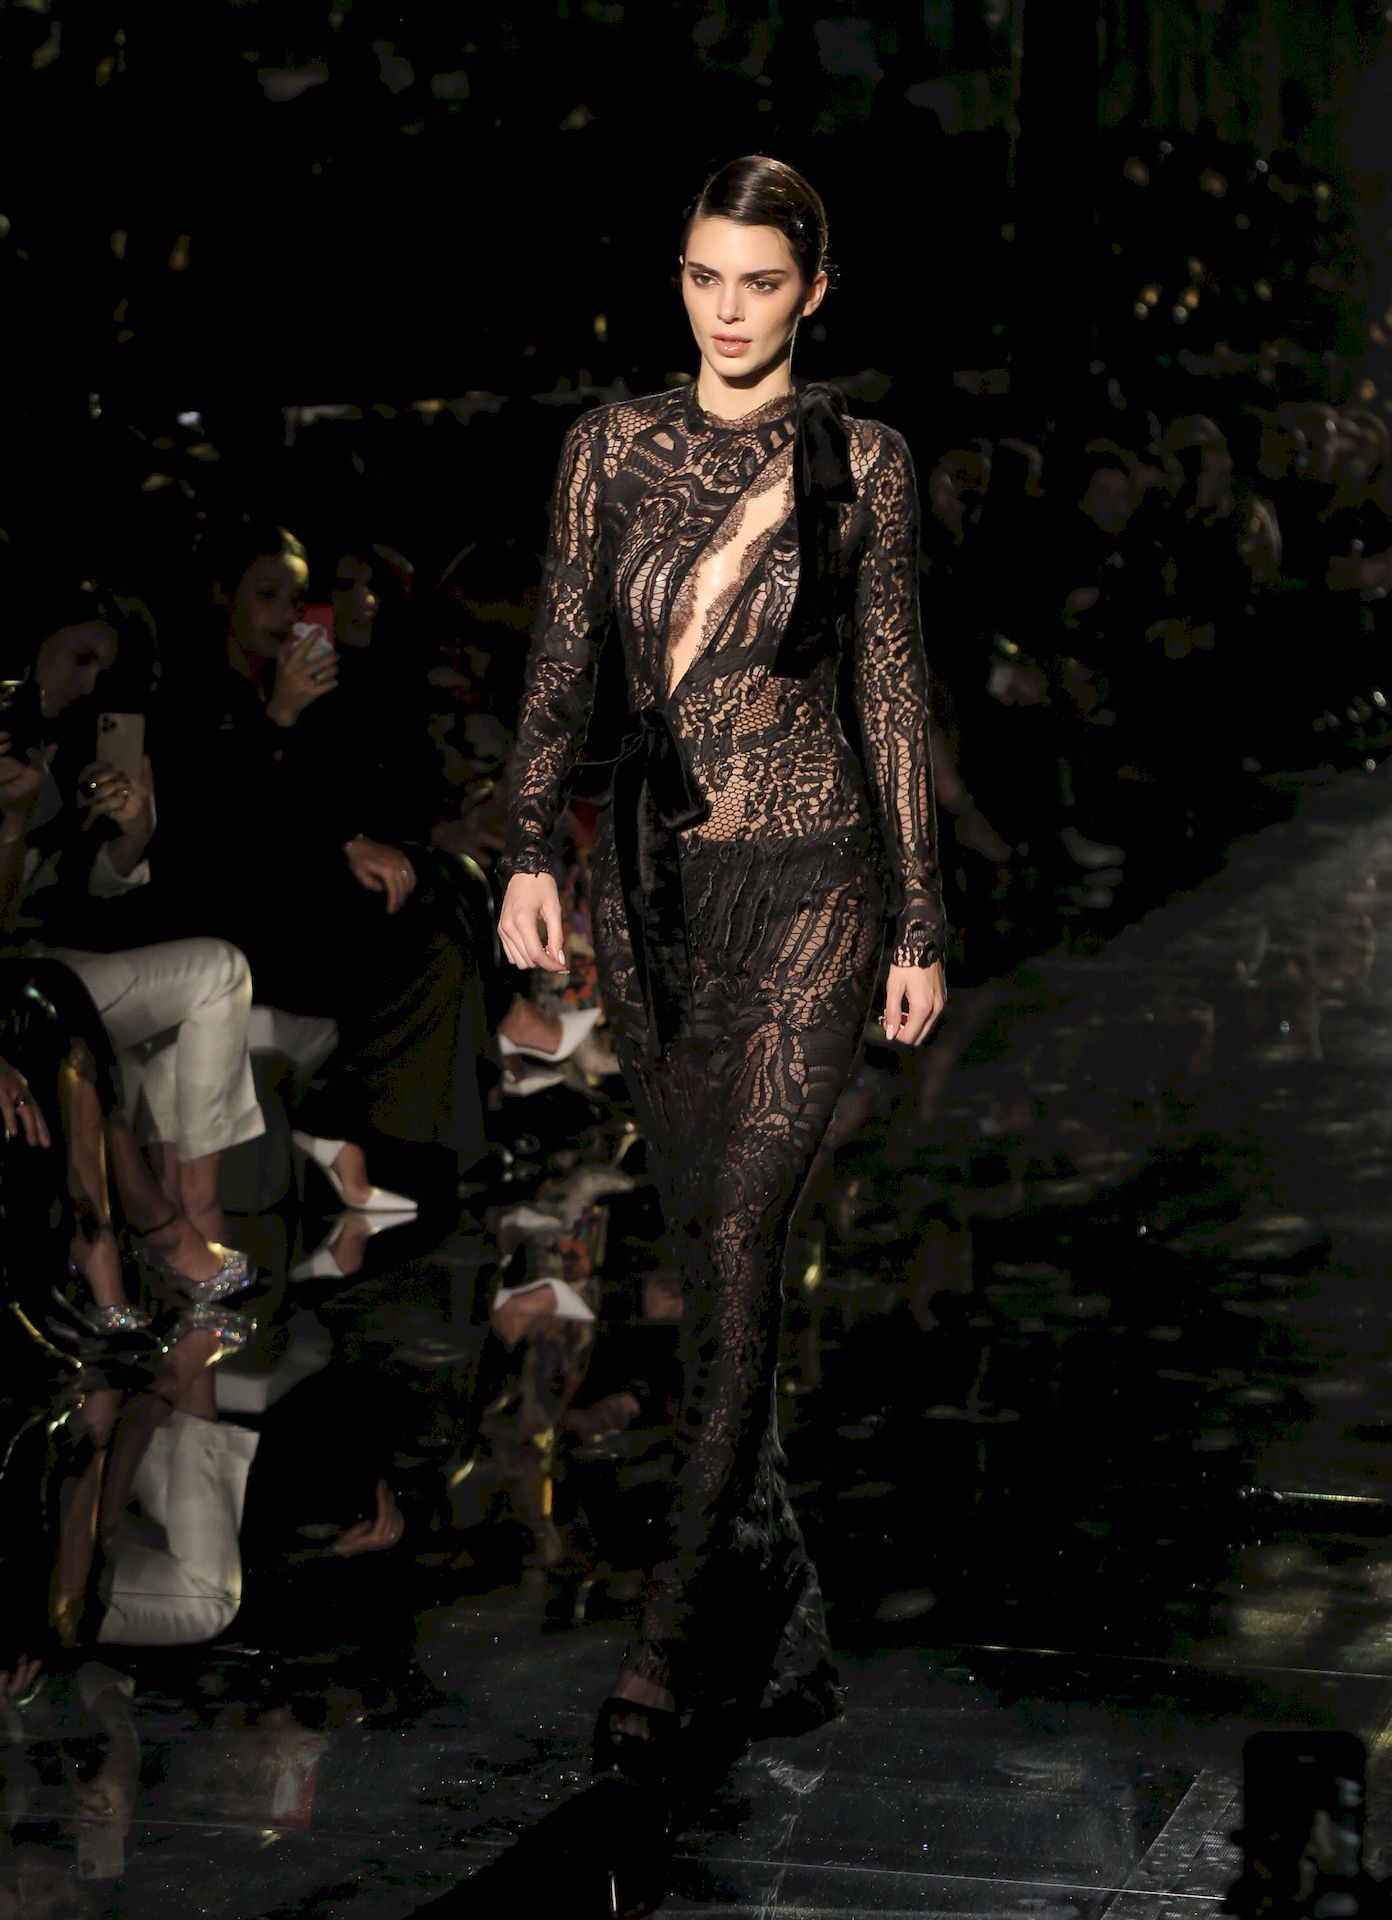 Kendall-Jenner-Walks-the-Runway-During-the-Tom-Ford-Show-0004.jpg